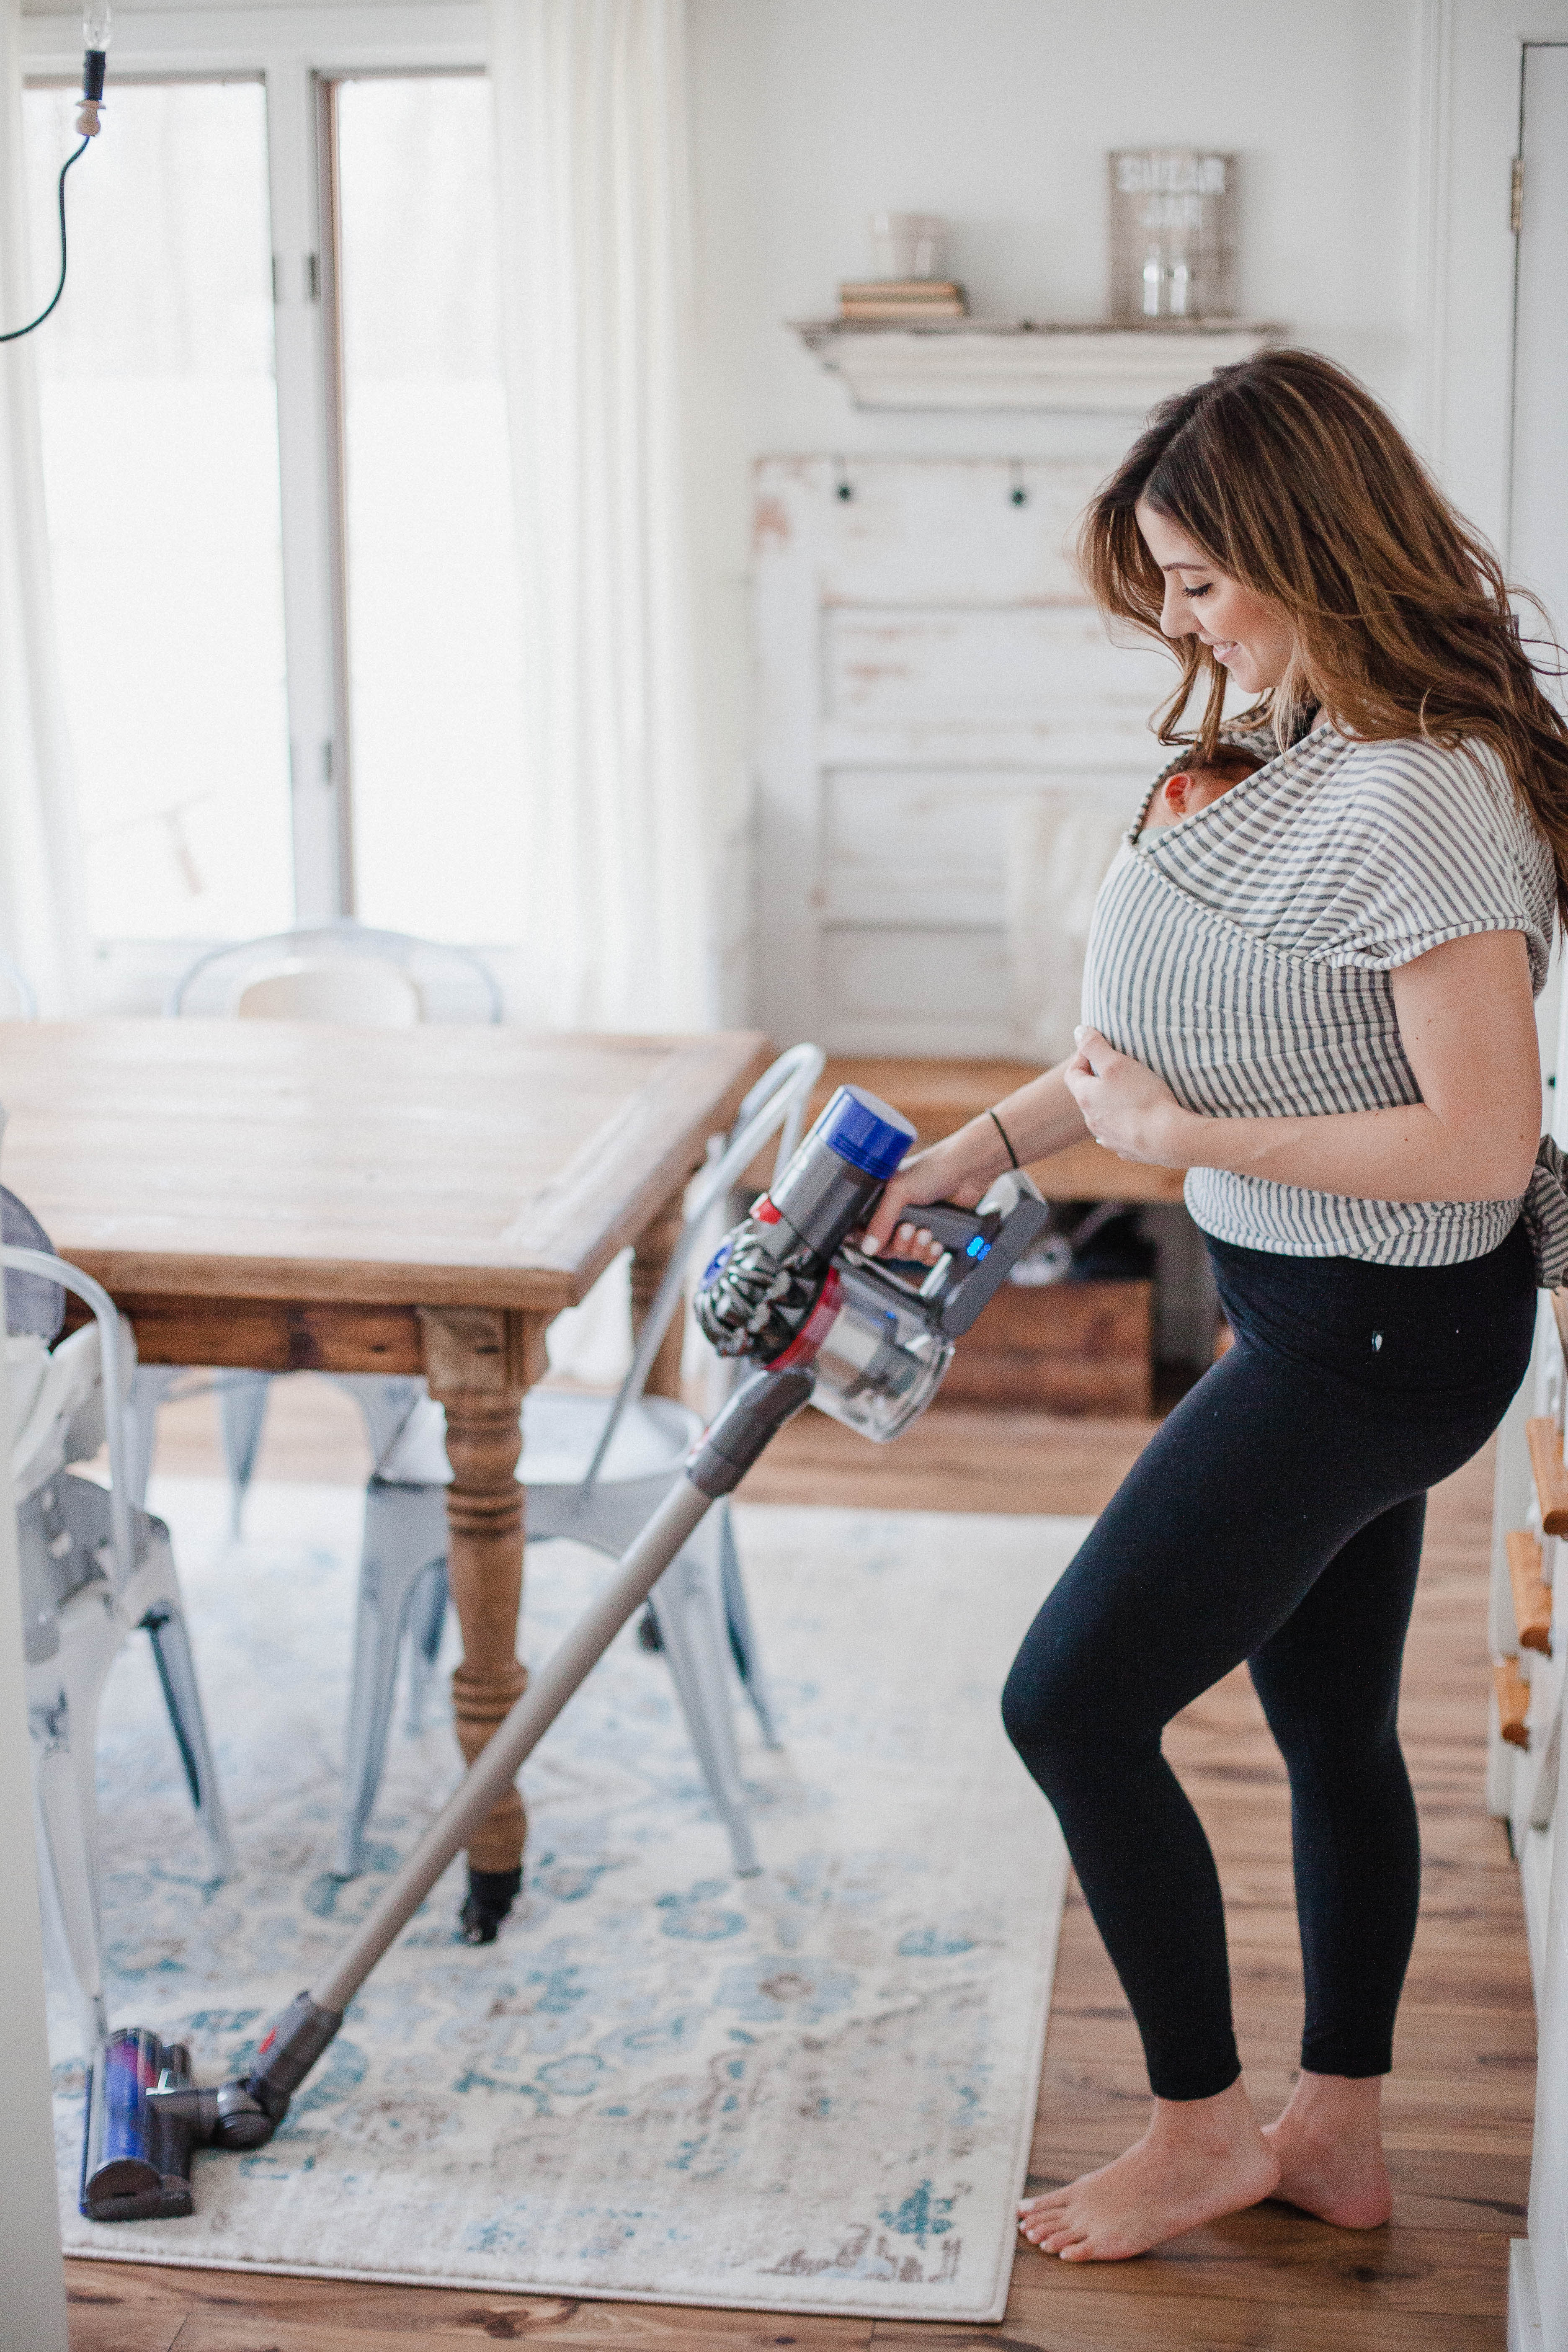 Life and style blogger Lauren McBride shares her cleaning routine as a new family of five, and some tips and tricks that help her maintain the home.